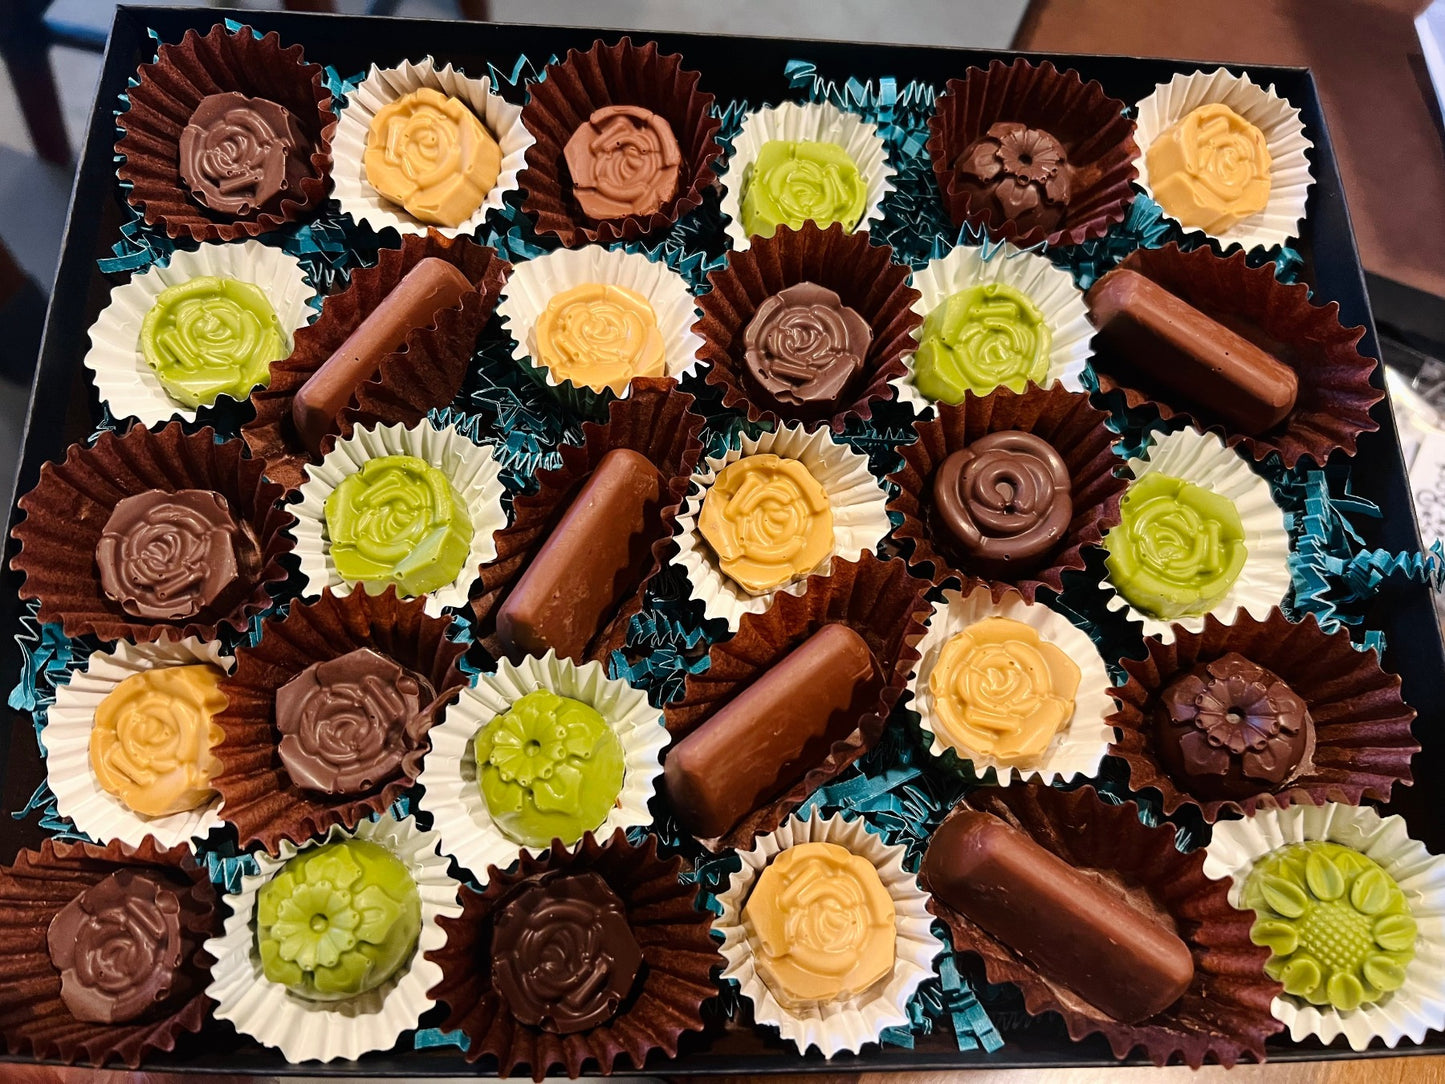 Special Selection - Assorted Confection Box